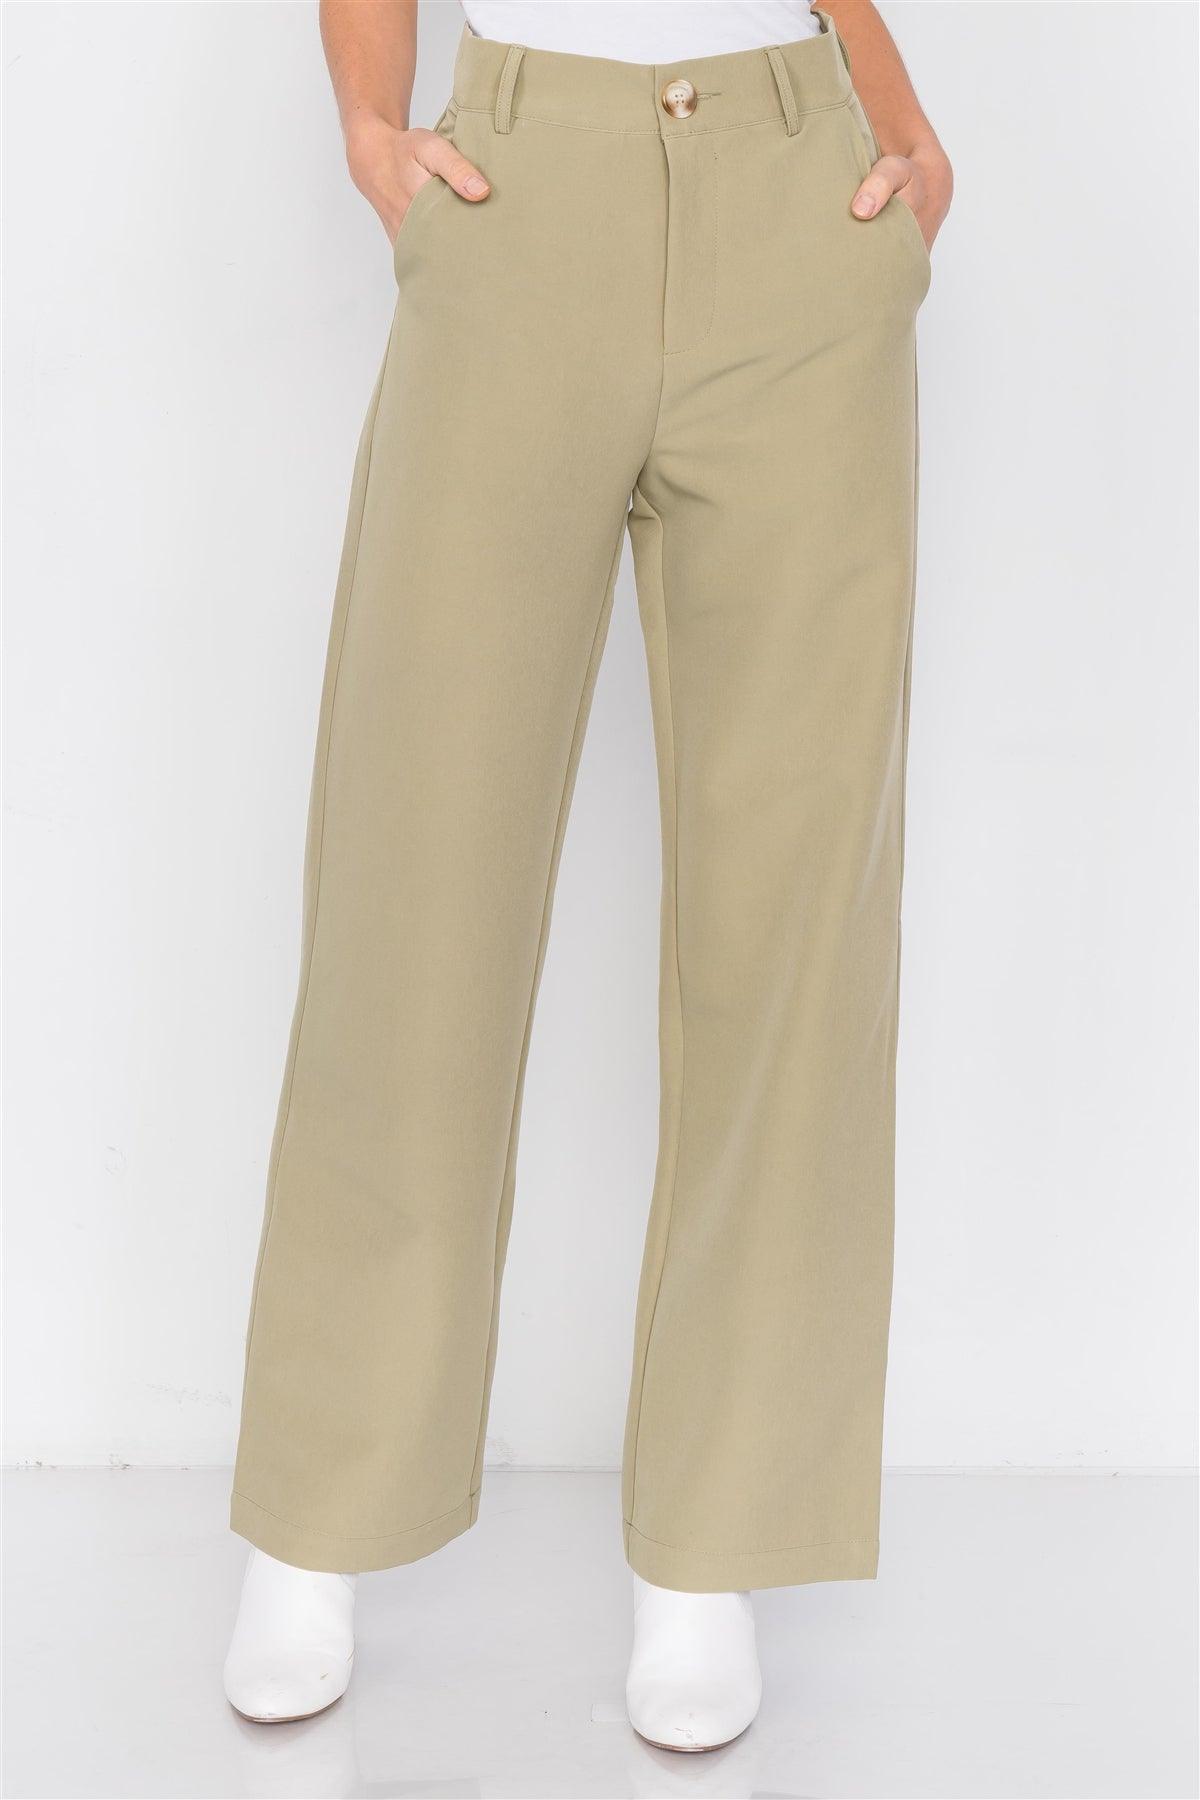 Khaki Olive Solid Office Chic High-Waist Ankle Pant /3-2-1